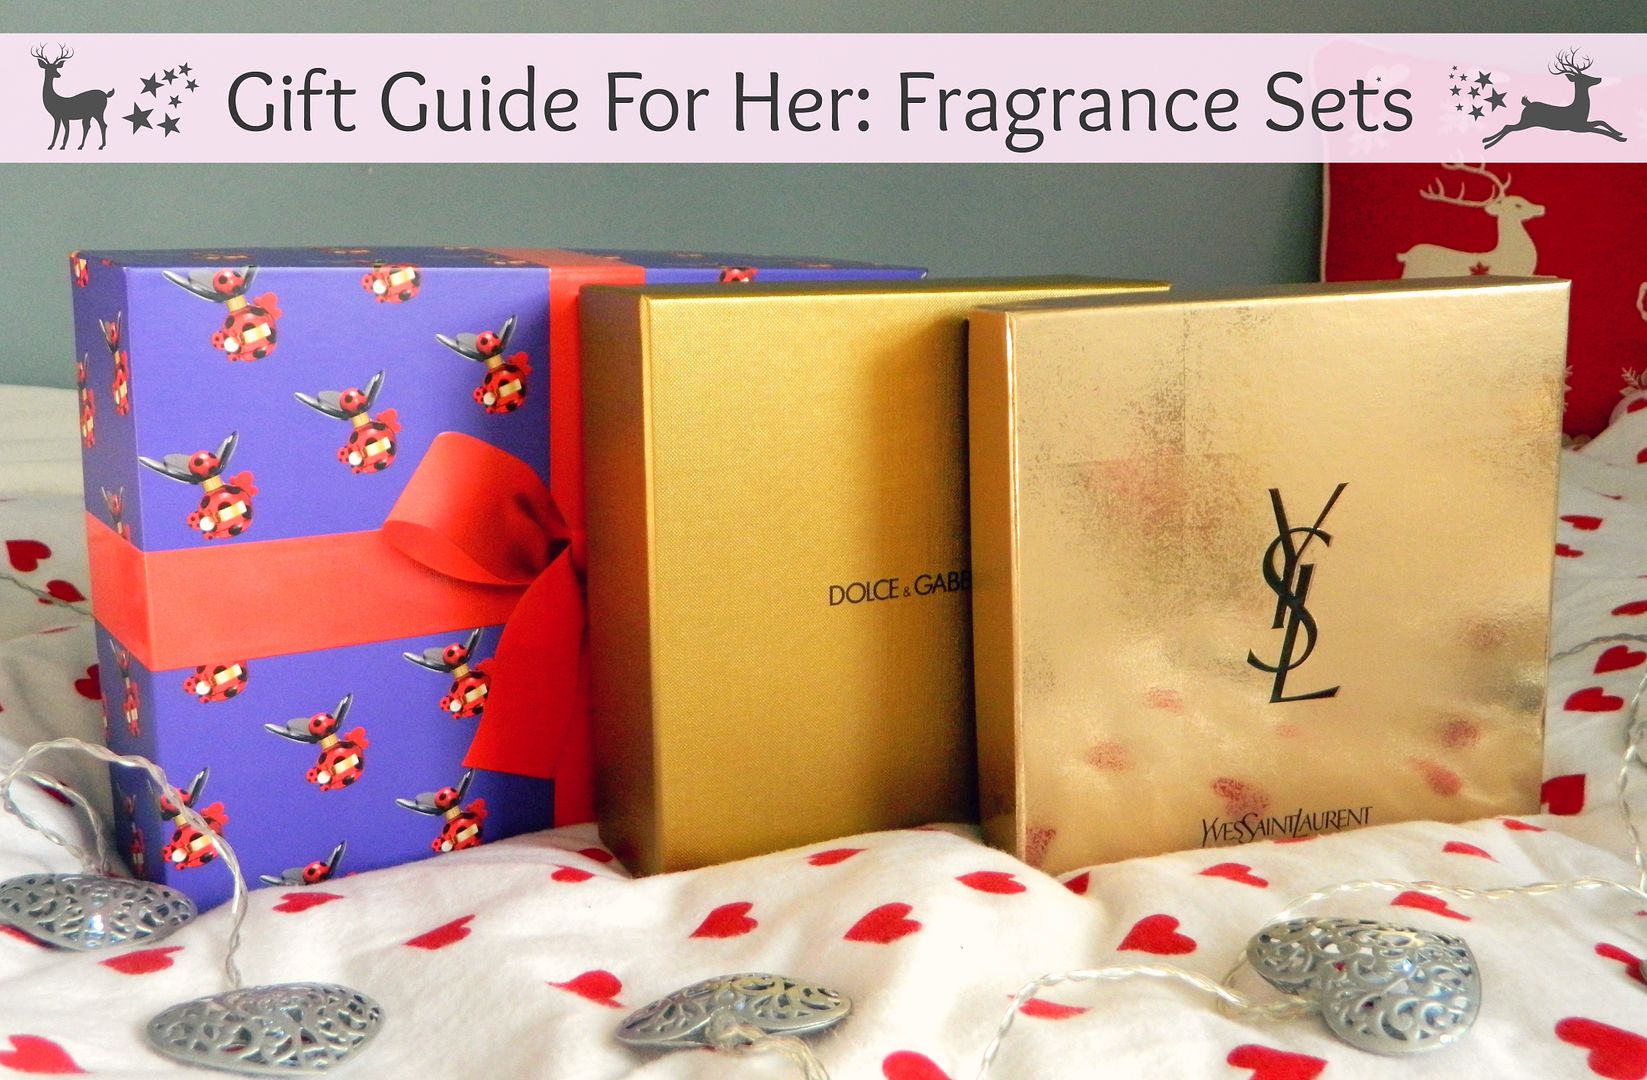 Christmas Gift Guide For Her Fragrance Sets Belle-amie UK Beauty Fashion Lifestyle Blog